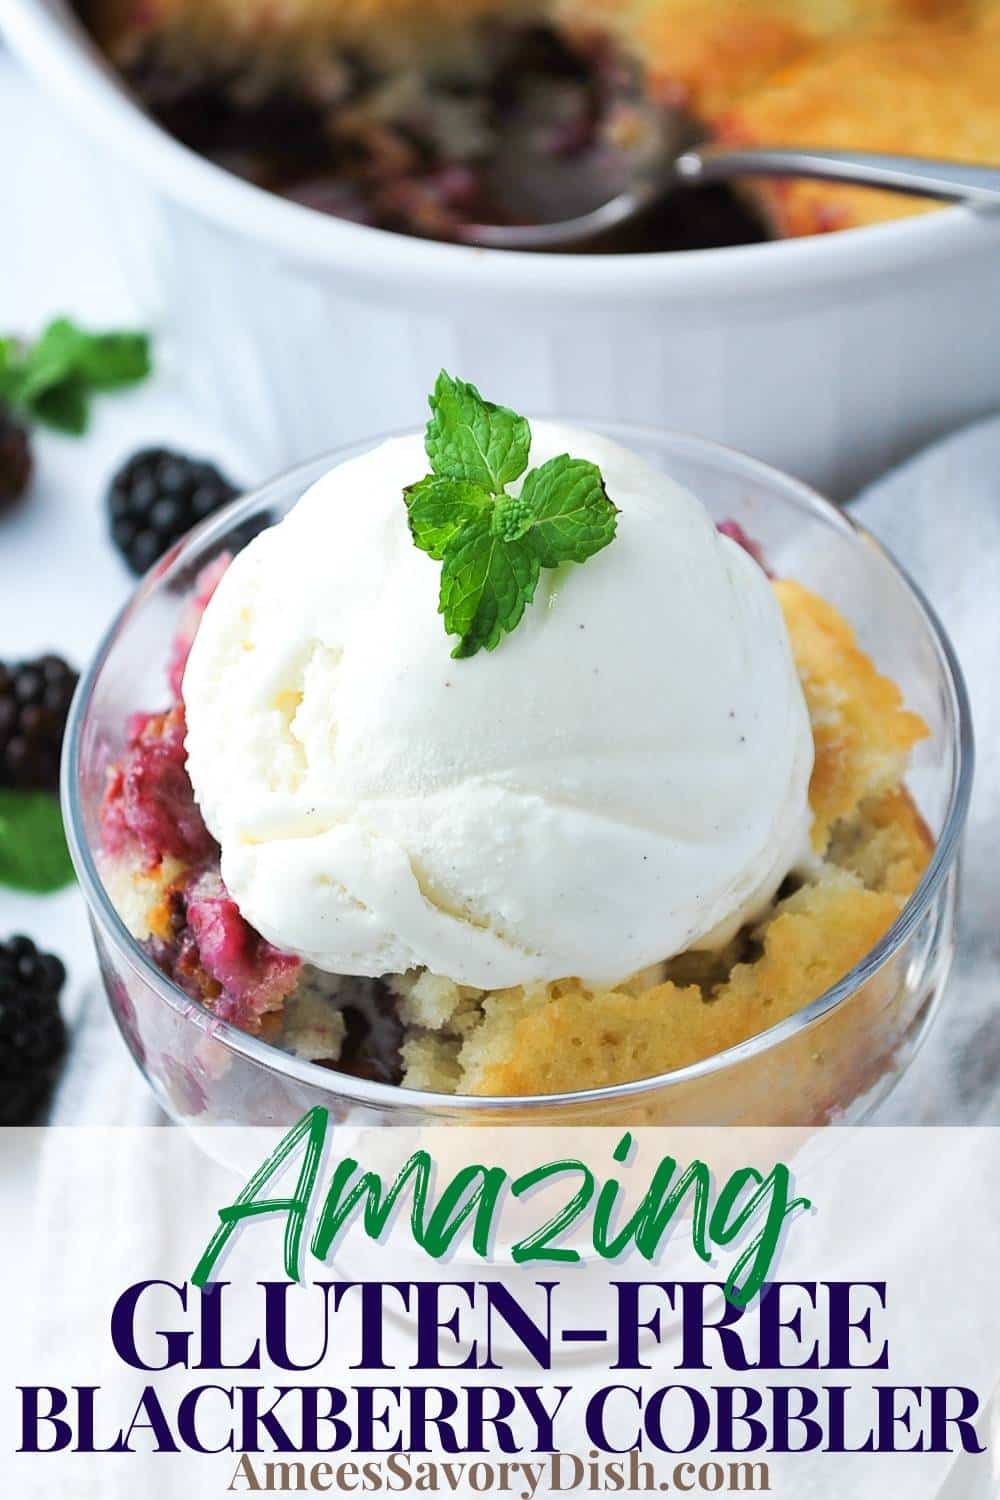 This easy Gluten-Free Blackberry Cobbler is the ultimate summer dessert. Inspired by classic Southern blackberry cobbler, this gluten-free version is just as delicious as the original. via @Ameessavorydish